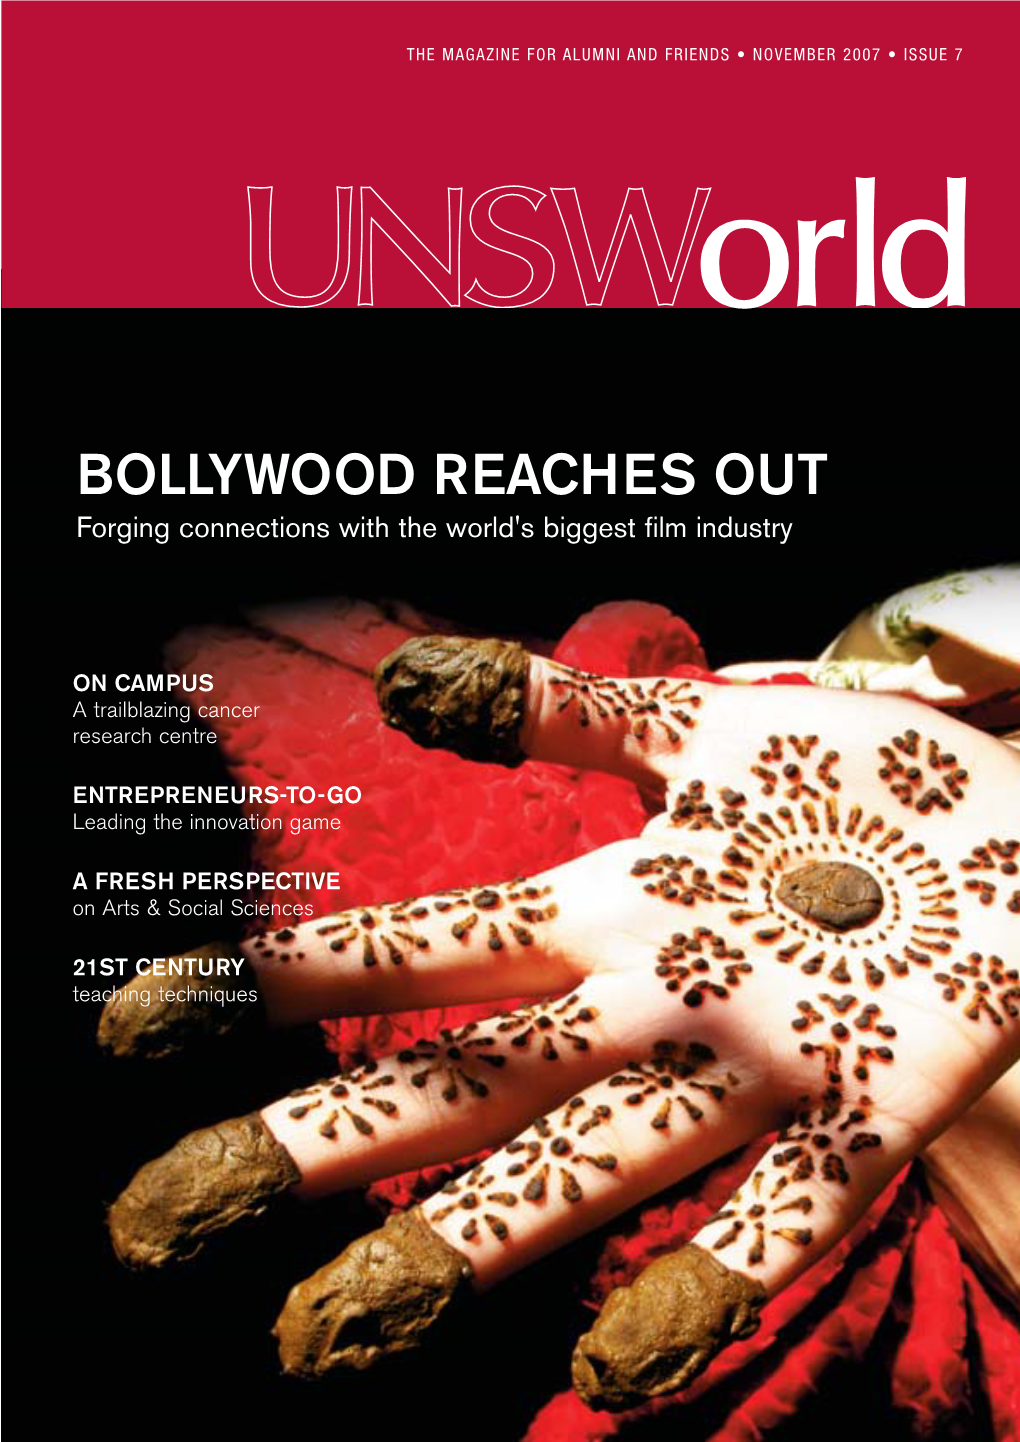 BOLLYWOOD REACHES out Forging Connections with the World's Biggest Film Industry